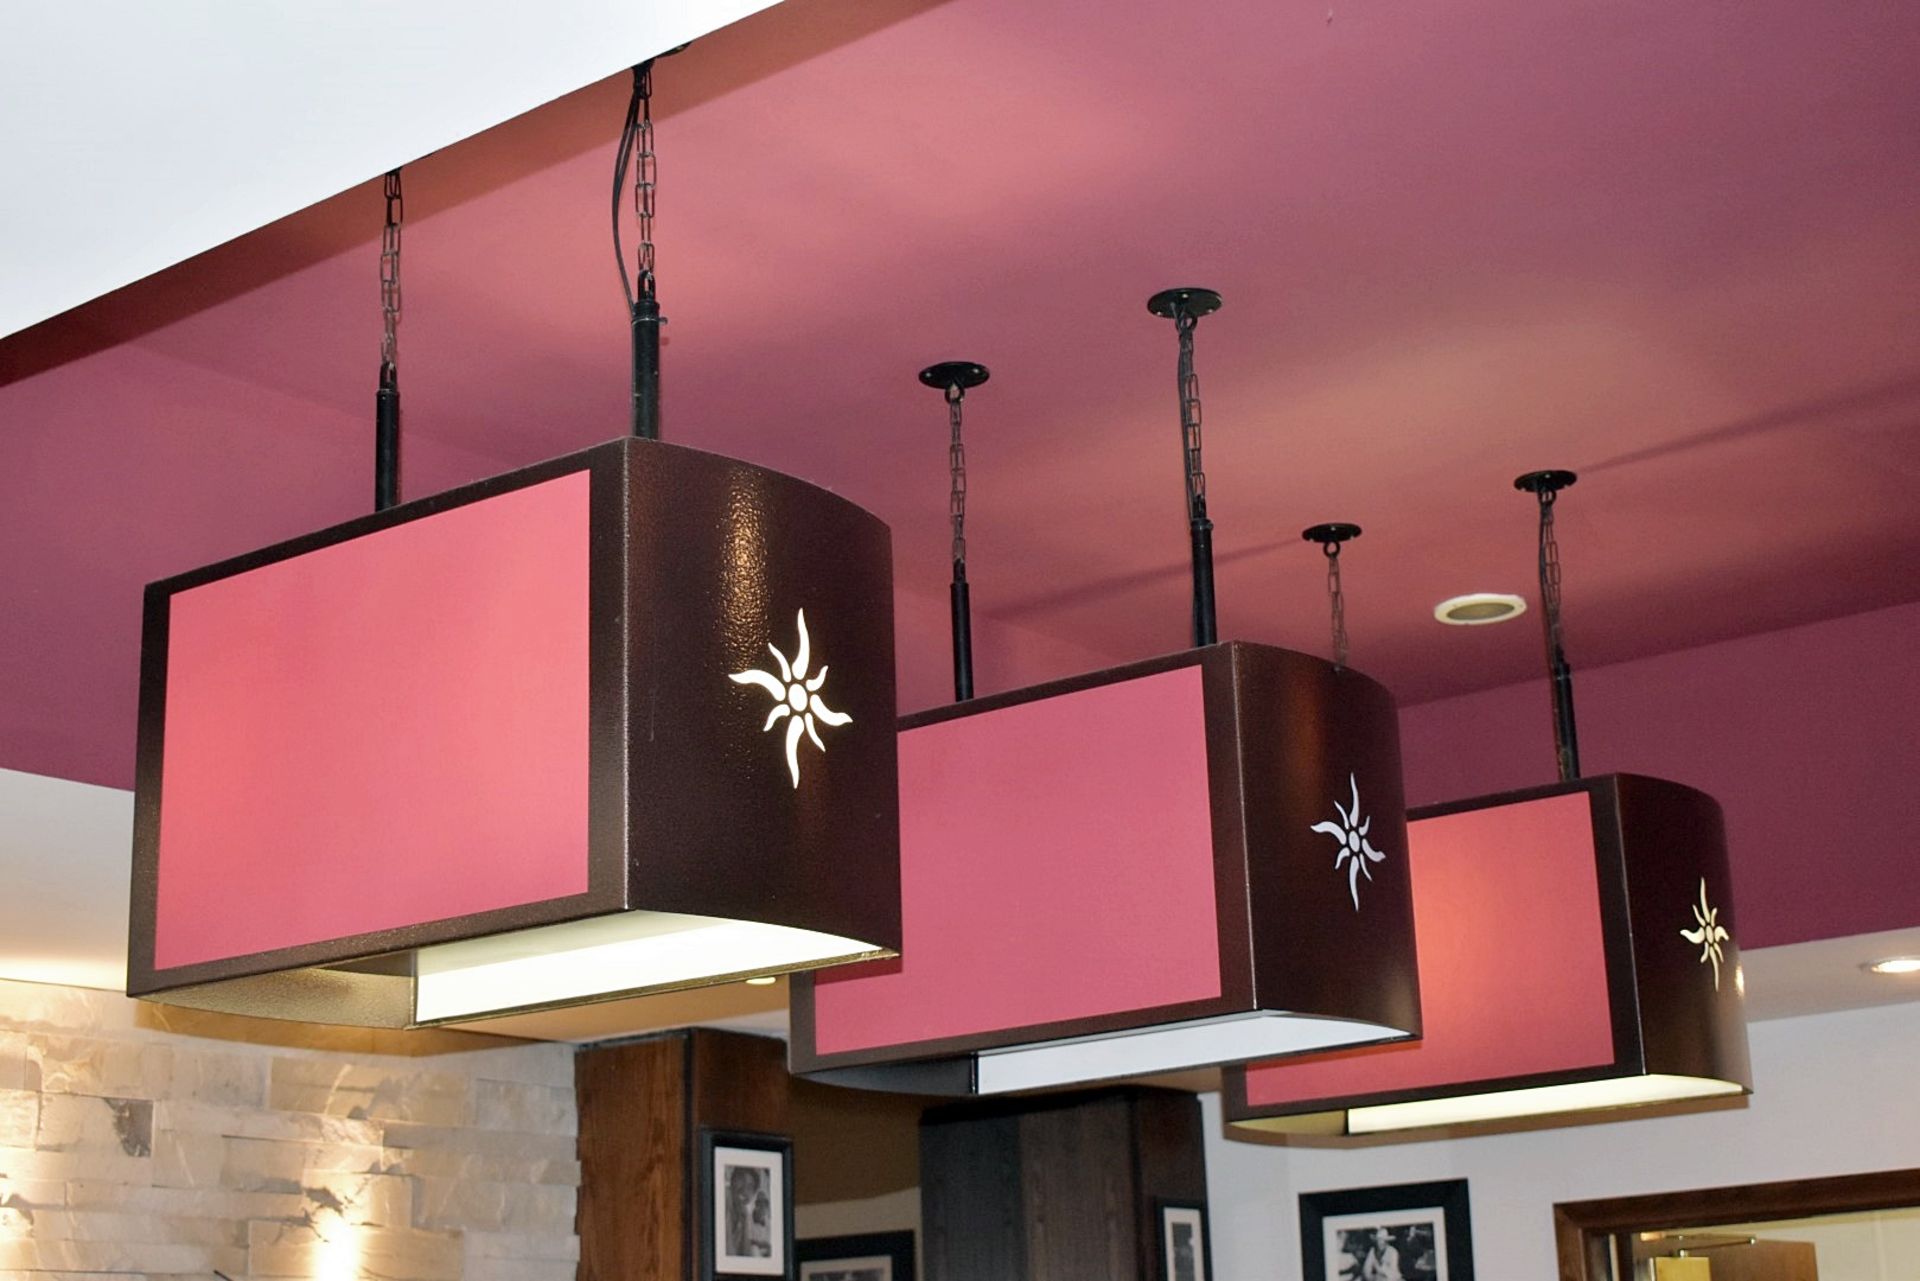 3 x Contemporary Suspended Ceiling Lights in Brown With Cut Out Star Design & Red Fabric Shade Sides - Image 4 of 4